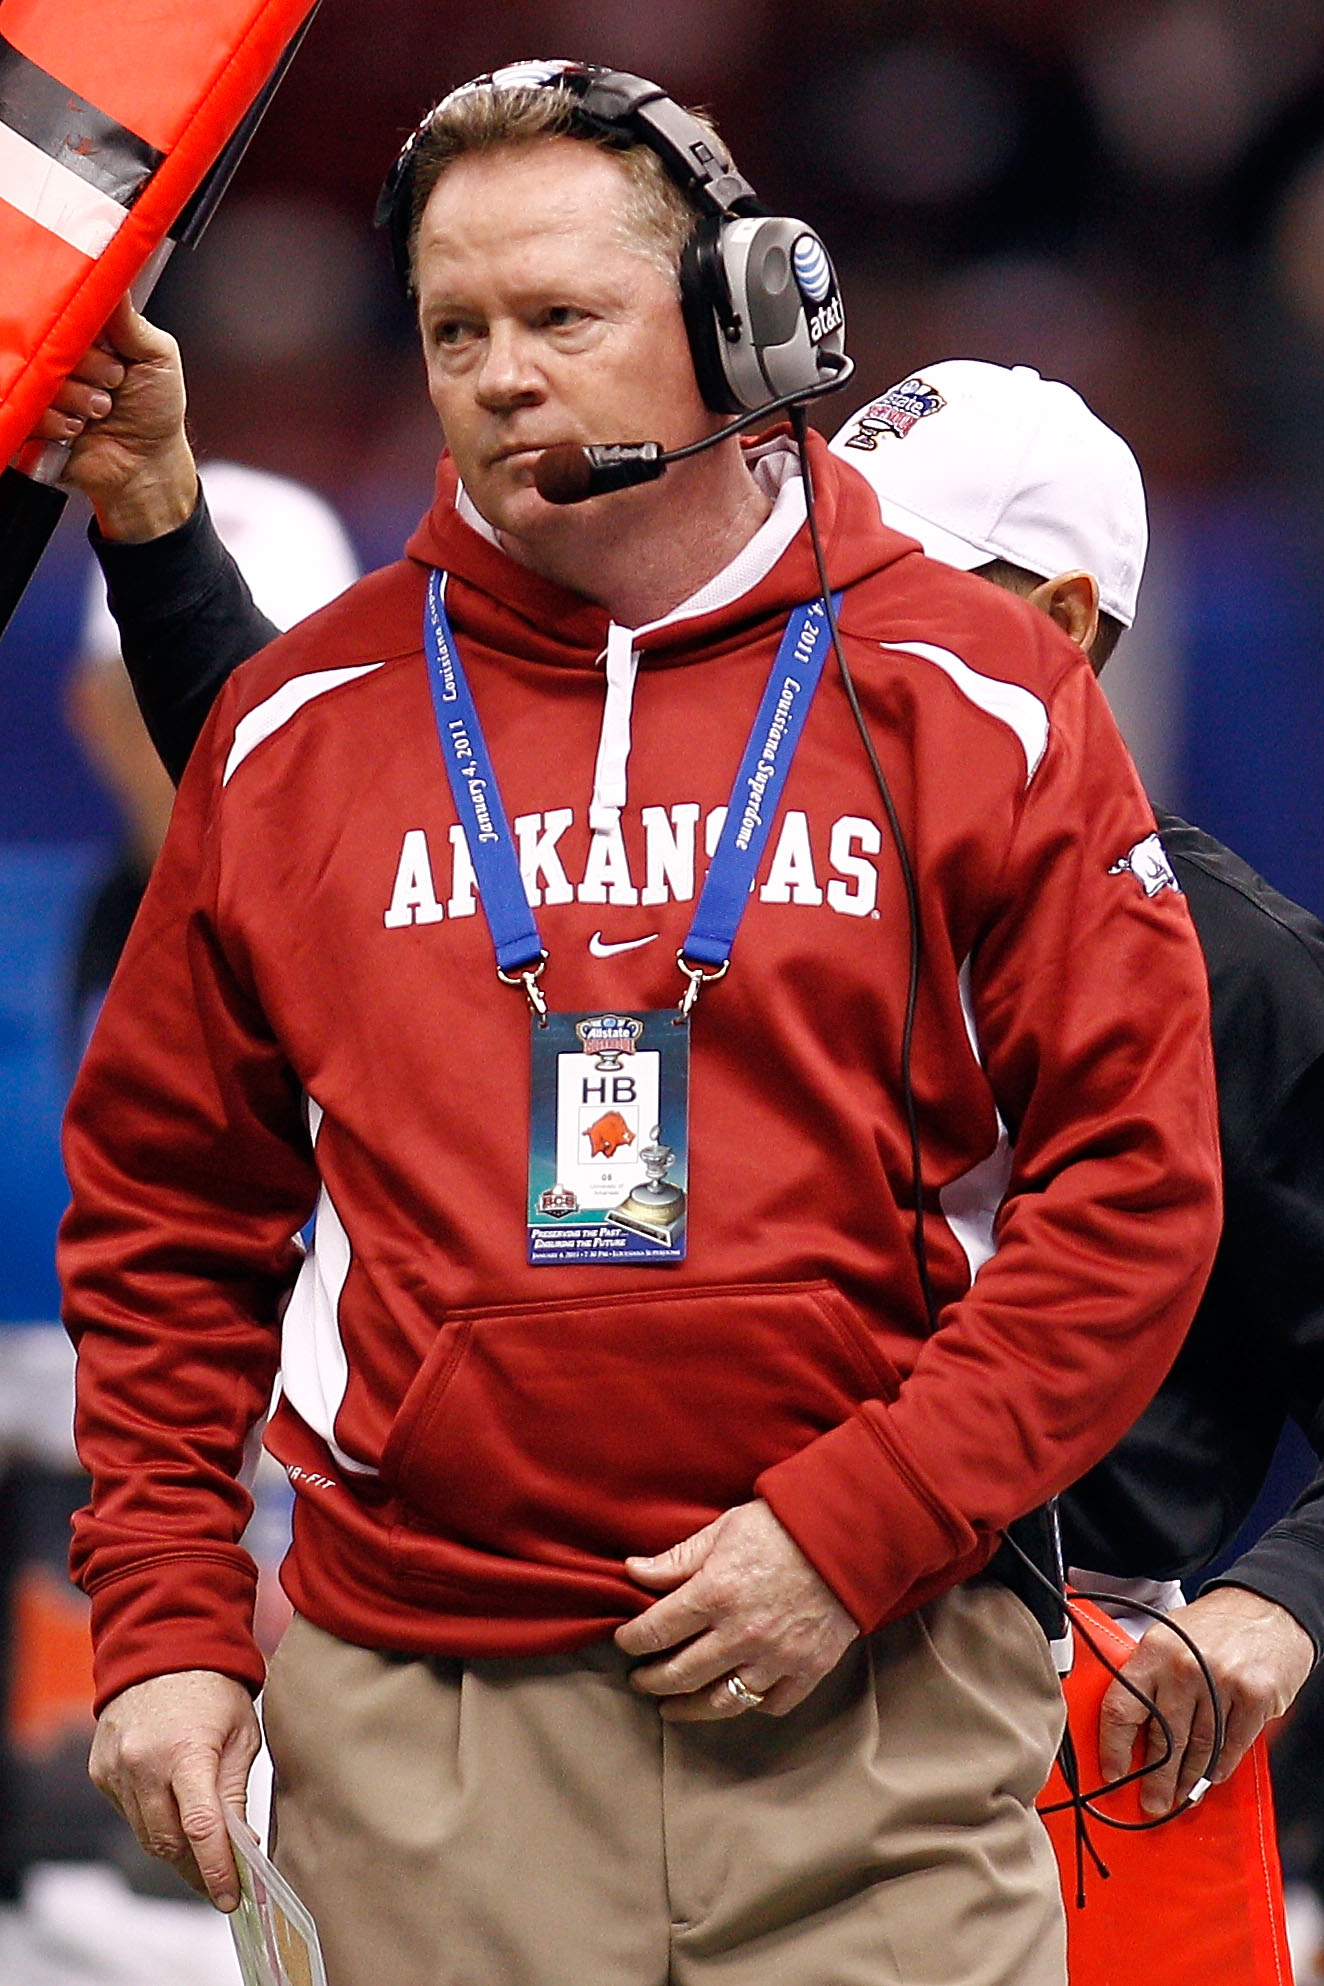 NEW ORLEANS, LA - JANUARY 04:  Head coach Bobby Petrino of the Arkansas Razorbacks reacts against the Ohio State Buckeyes during the Allstate Sugar Bowl at the Louisiana Superdome on January 4, 2011 in New Orleans, Louisiana.  (Photo by Chris Graythen/Get